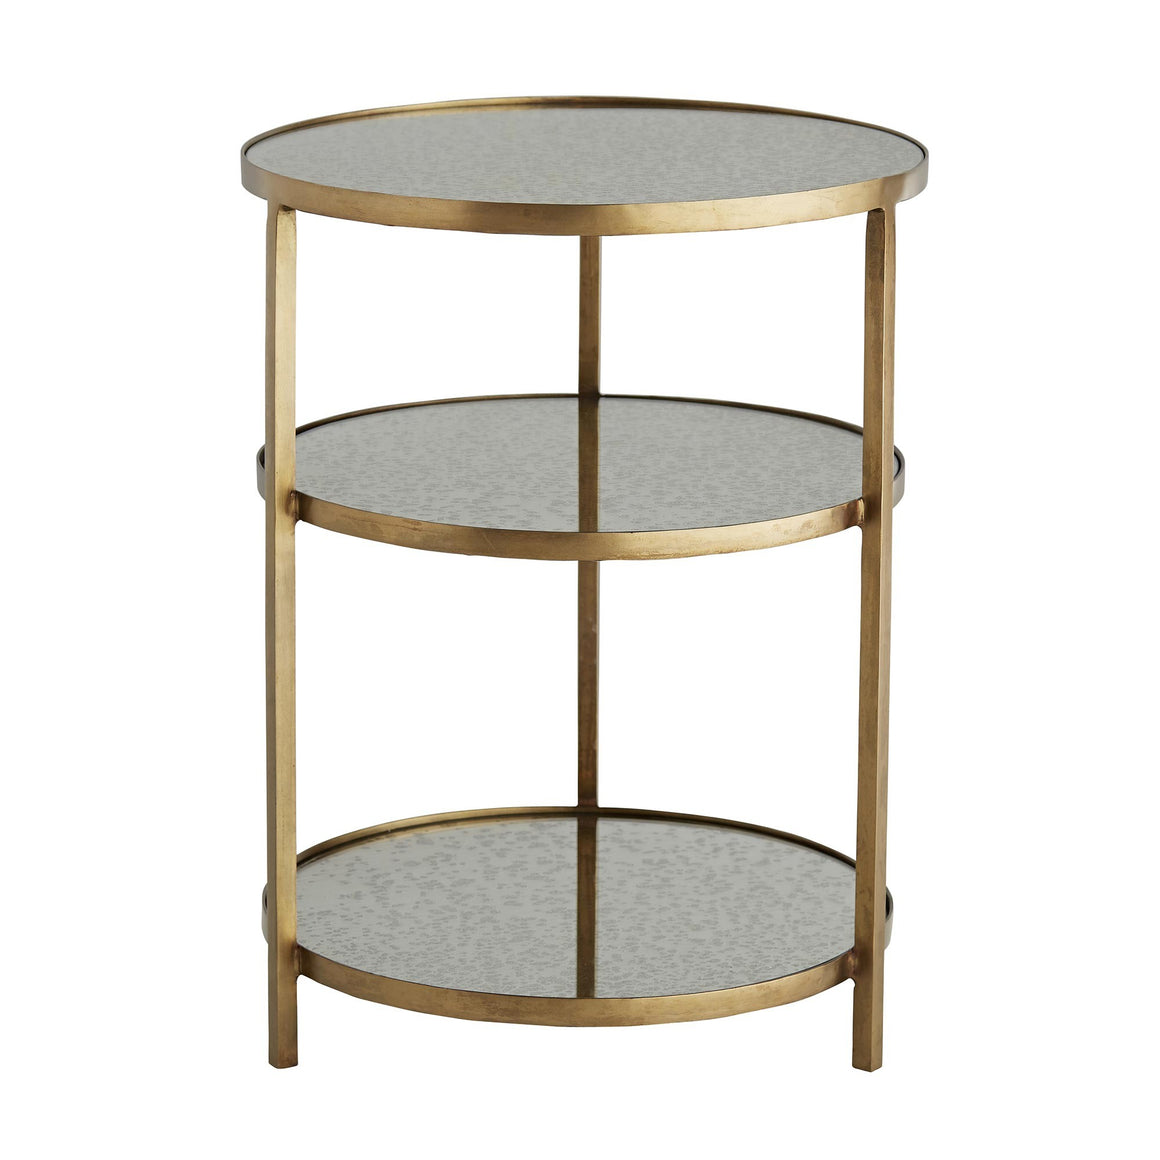 Arteriors Percy End Table Antique Brass/Antiqued Mirror